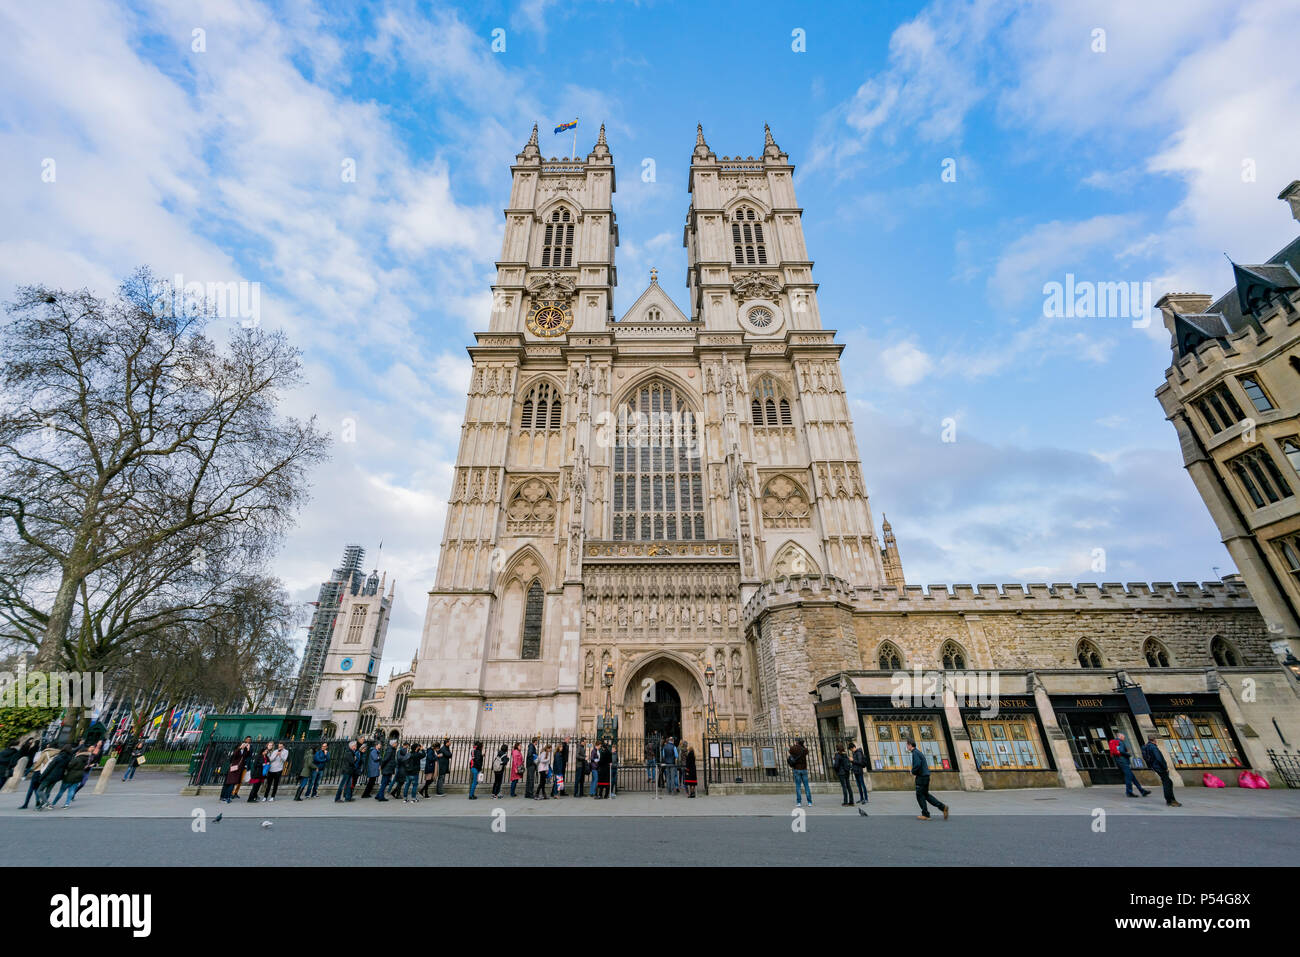 London, APR 15: Exterior view of the Westminster Abbey and long queueing line on APR 15, 2018 at London, United Kingdom Stock Photo